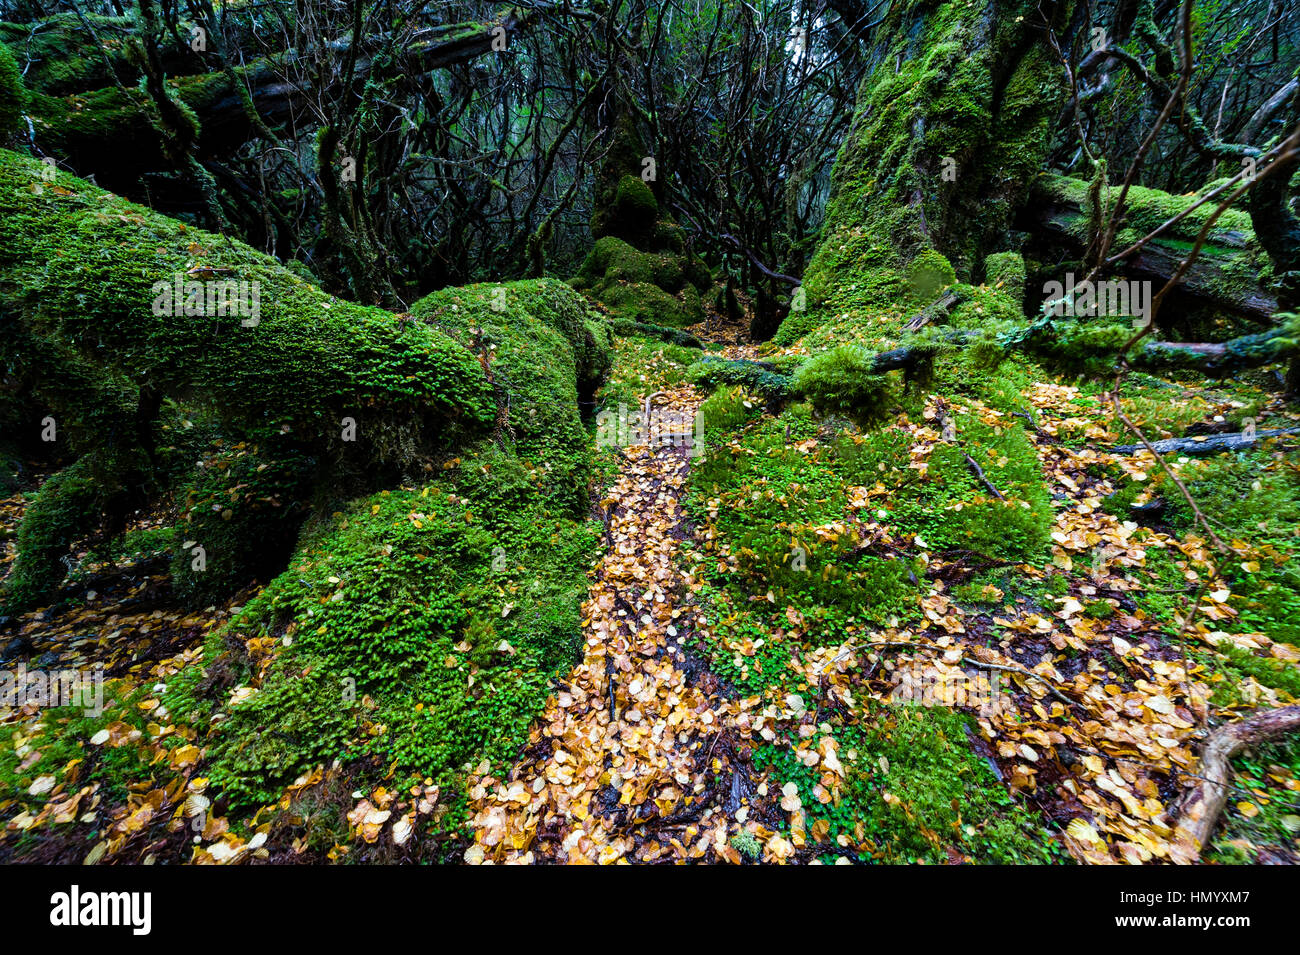 Fallen leaves from a deciduous Beech carpet the moss covered floor of a cool temperate rainforest. Stock Photo